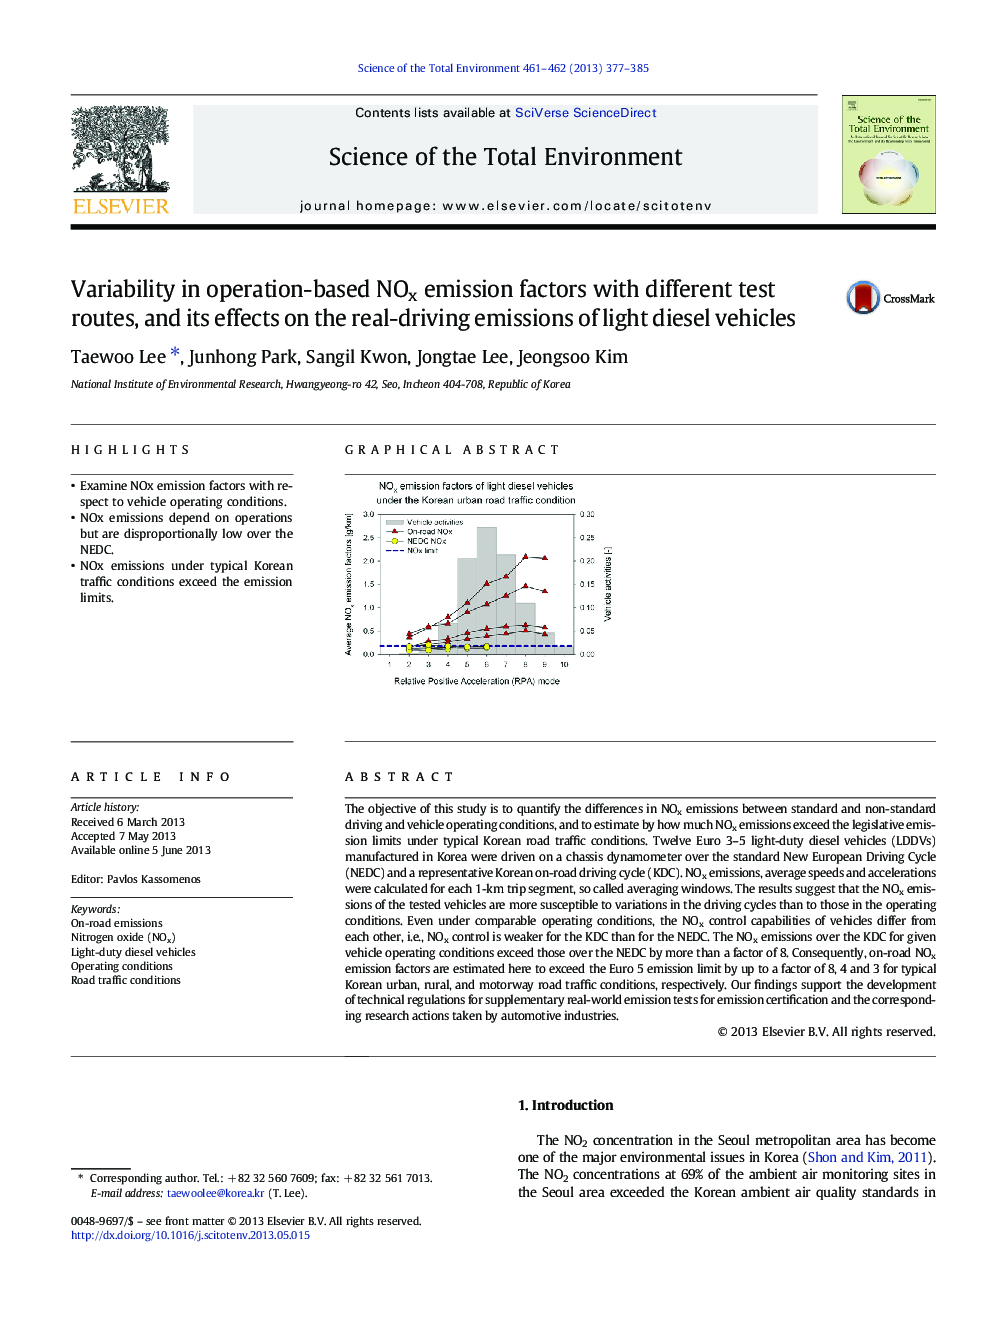 Variability in operation-based NOx emission factors with different test routes, and its effects on the real-driving emissions of light diesel vehicles